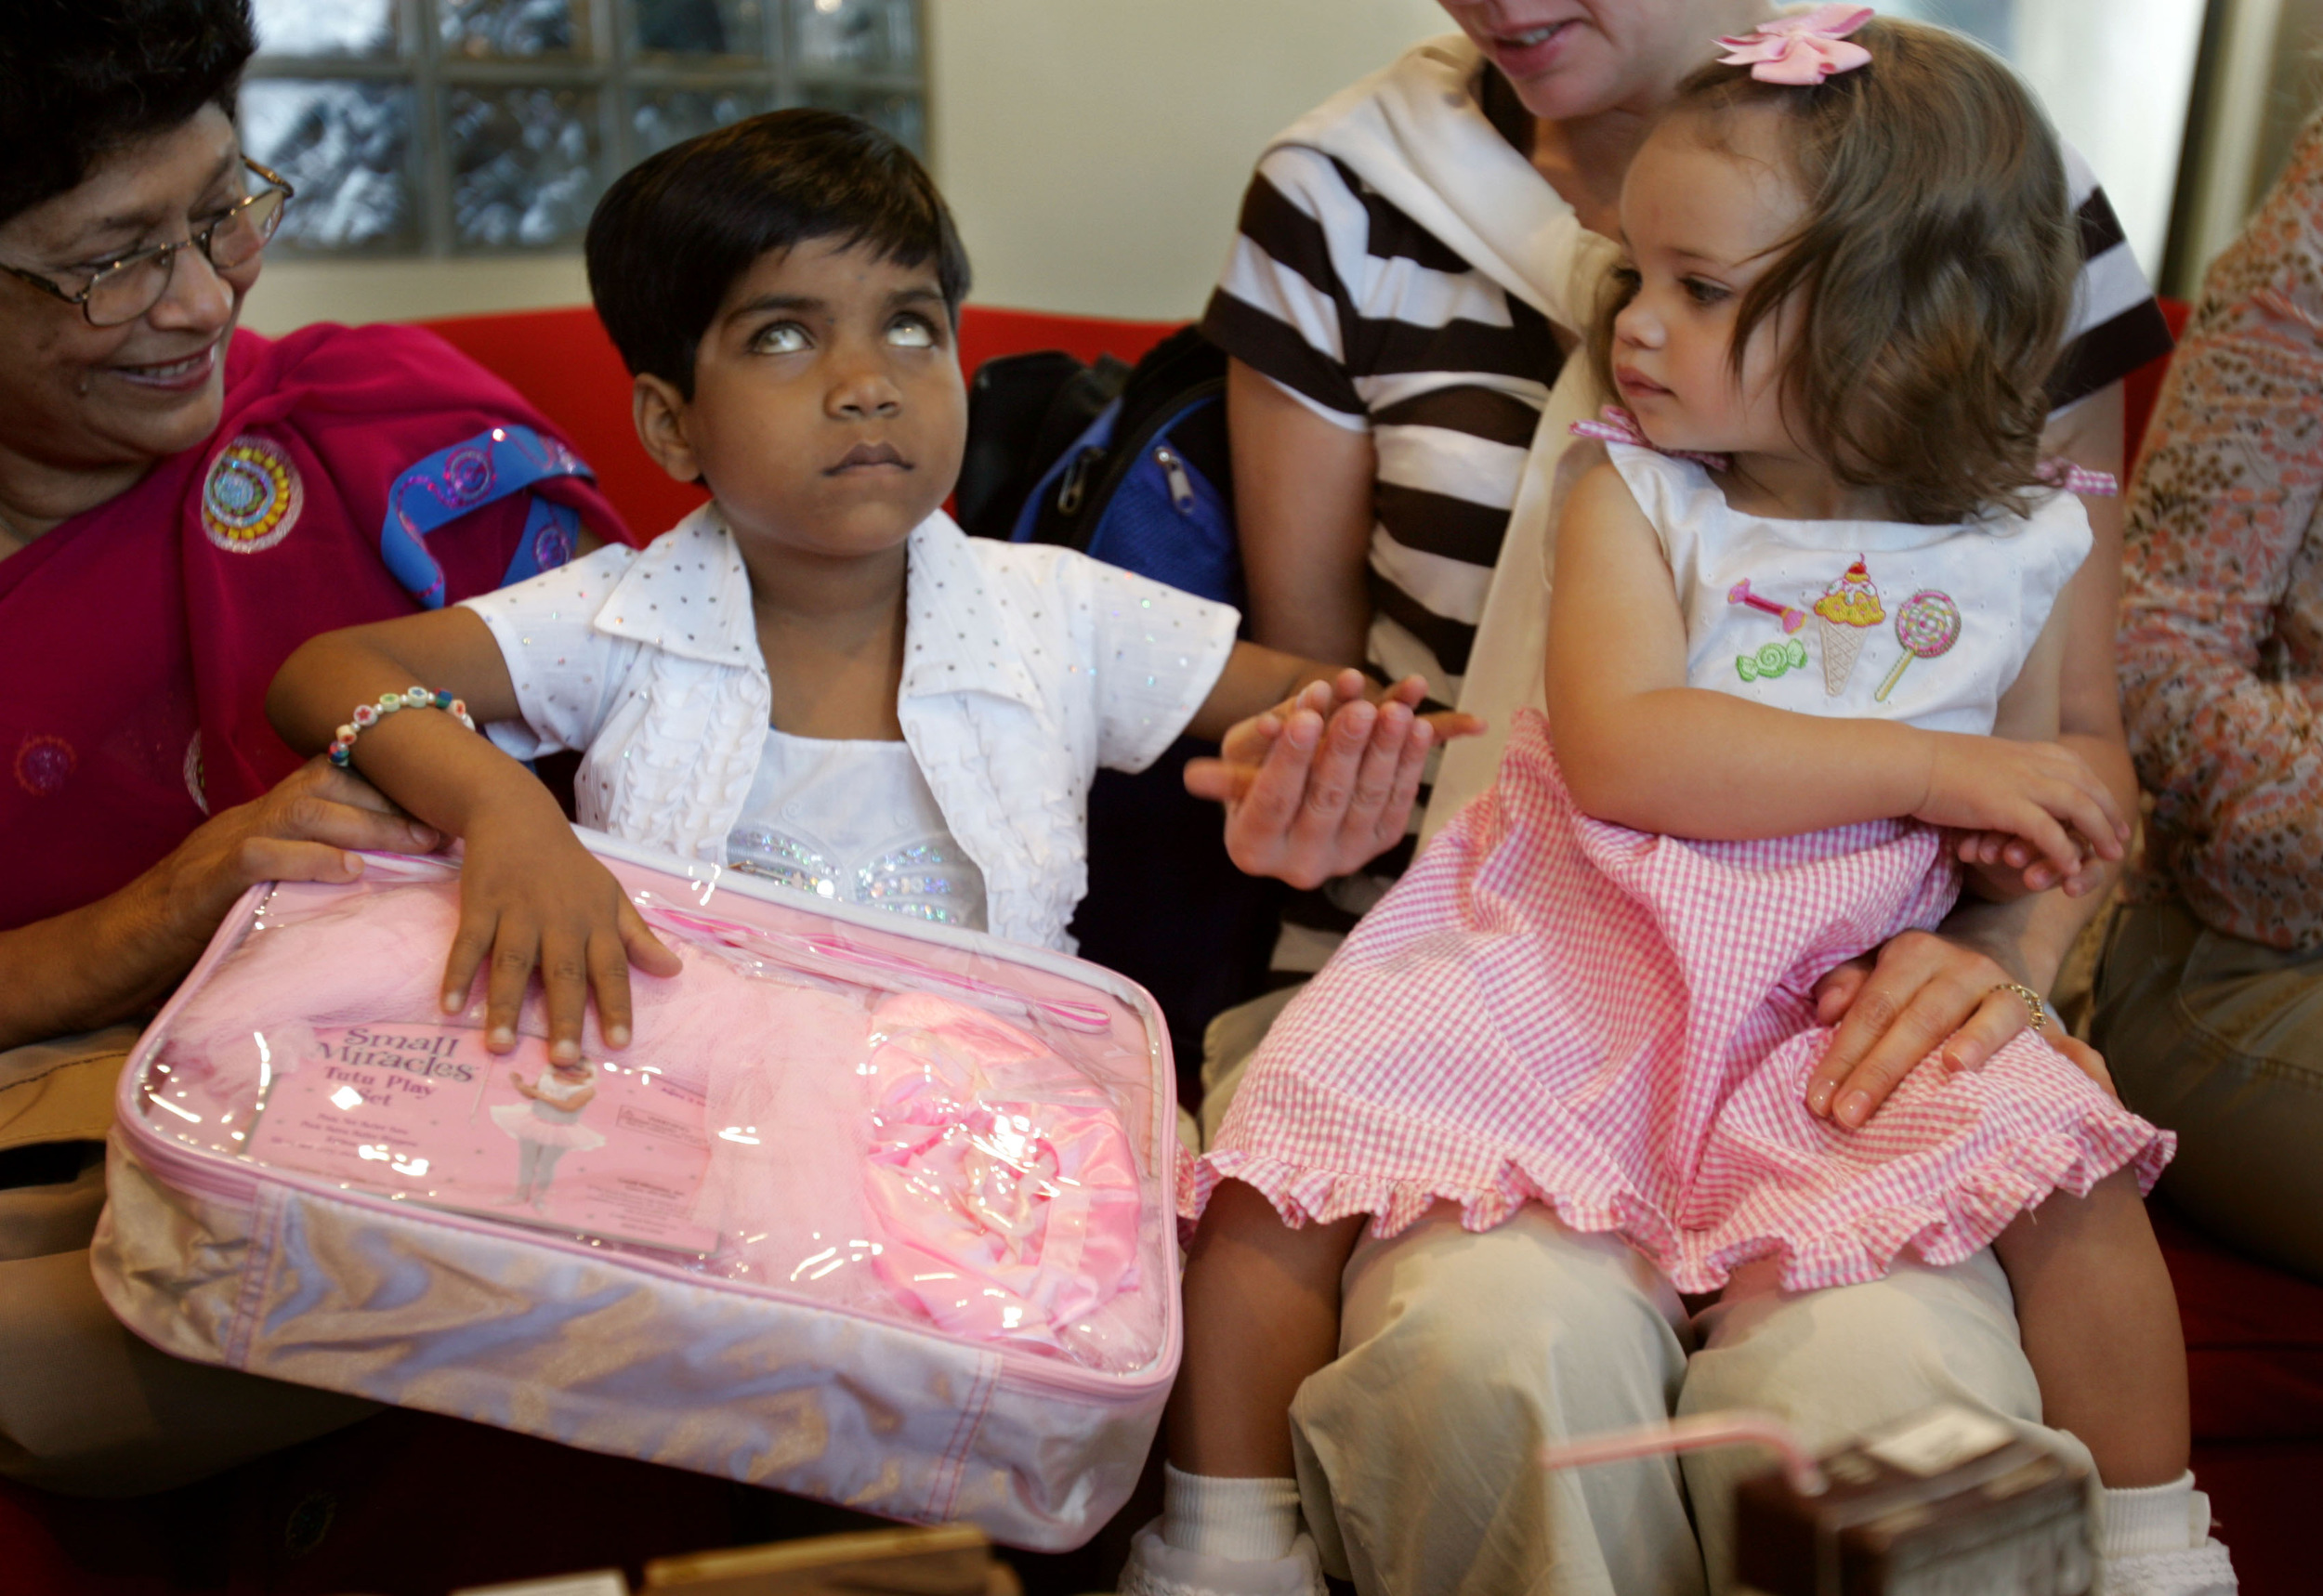  One-year-old Lexi Quillin, reacts shyly to an inquisitive Kajal,  during a party held for Kajal at the Wang Institute Friday, March 30 2007 in Nashville, Tenn. 